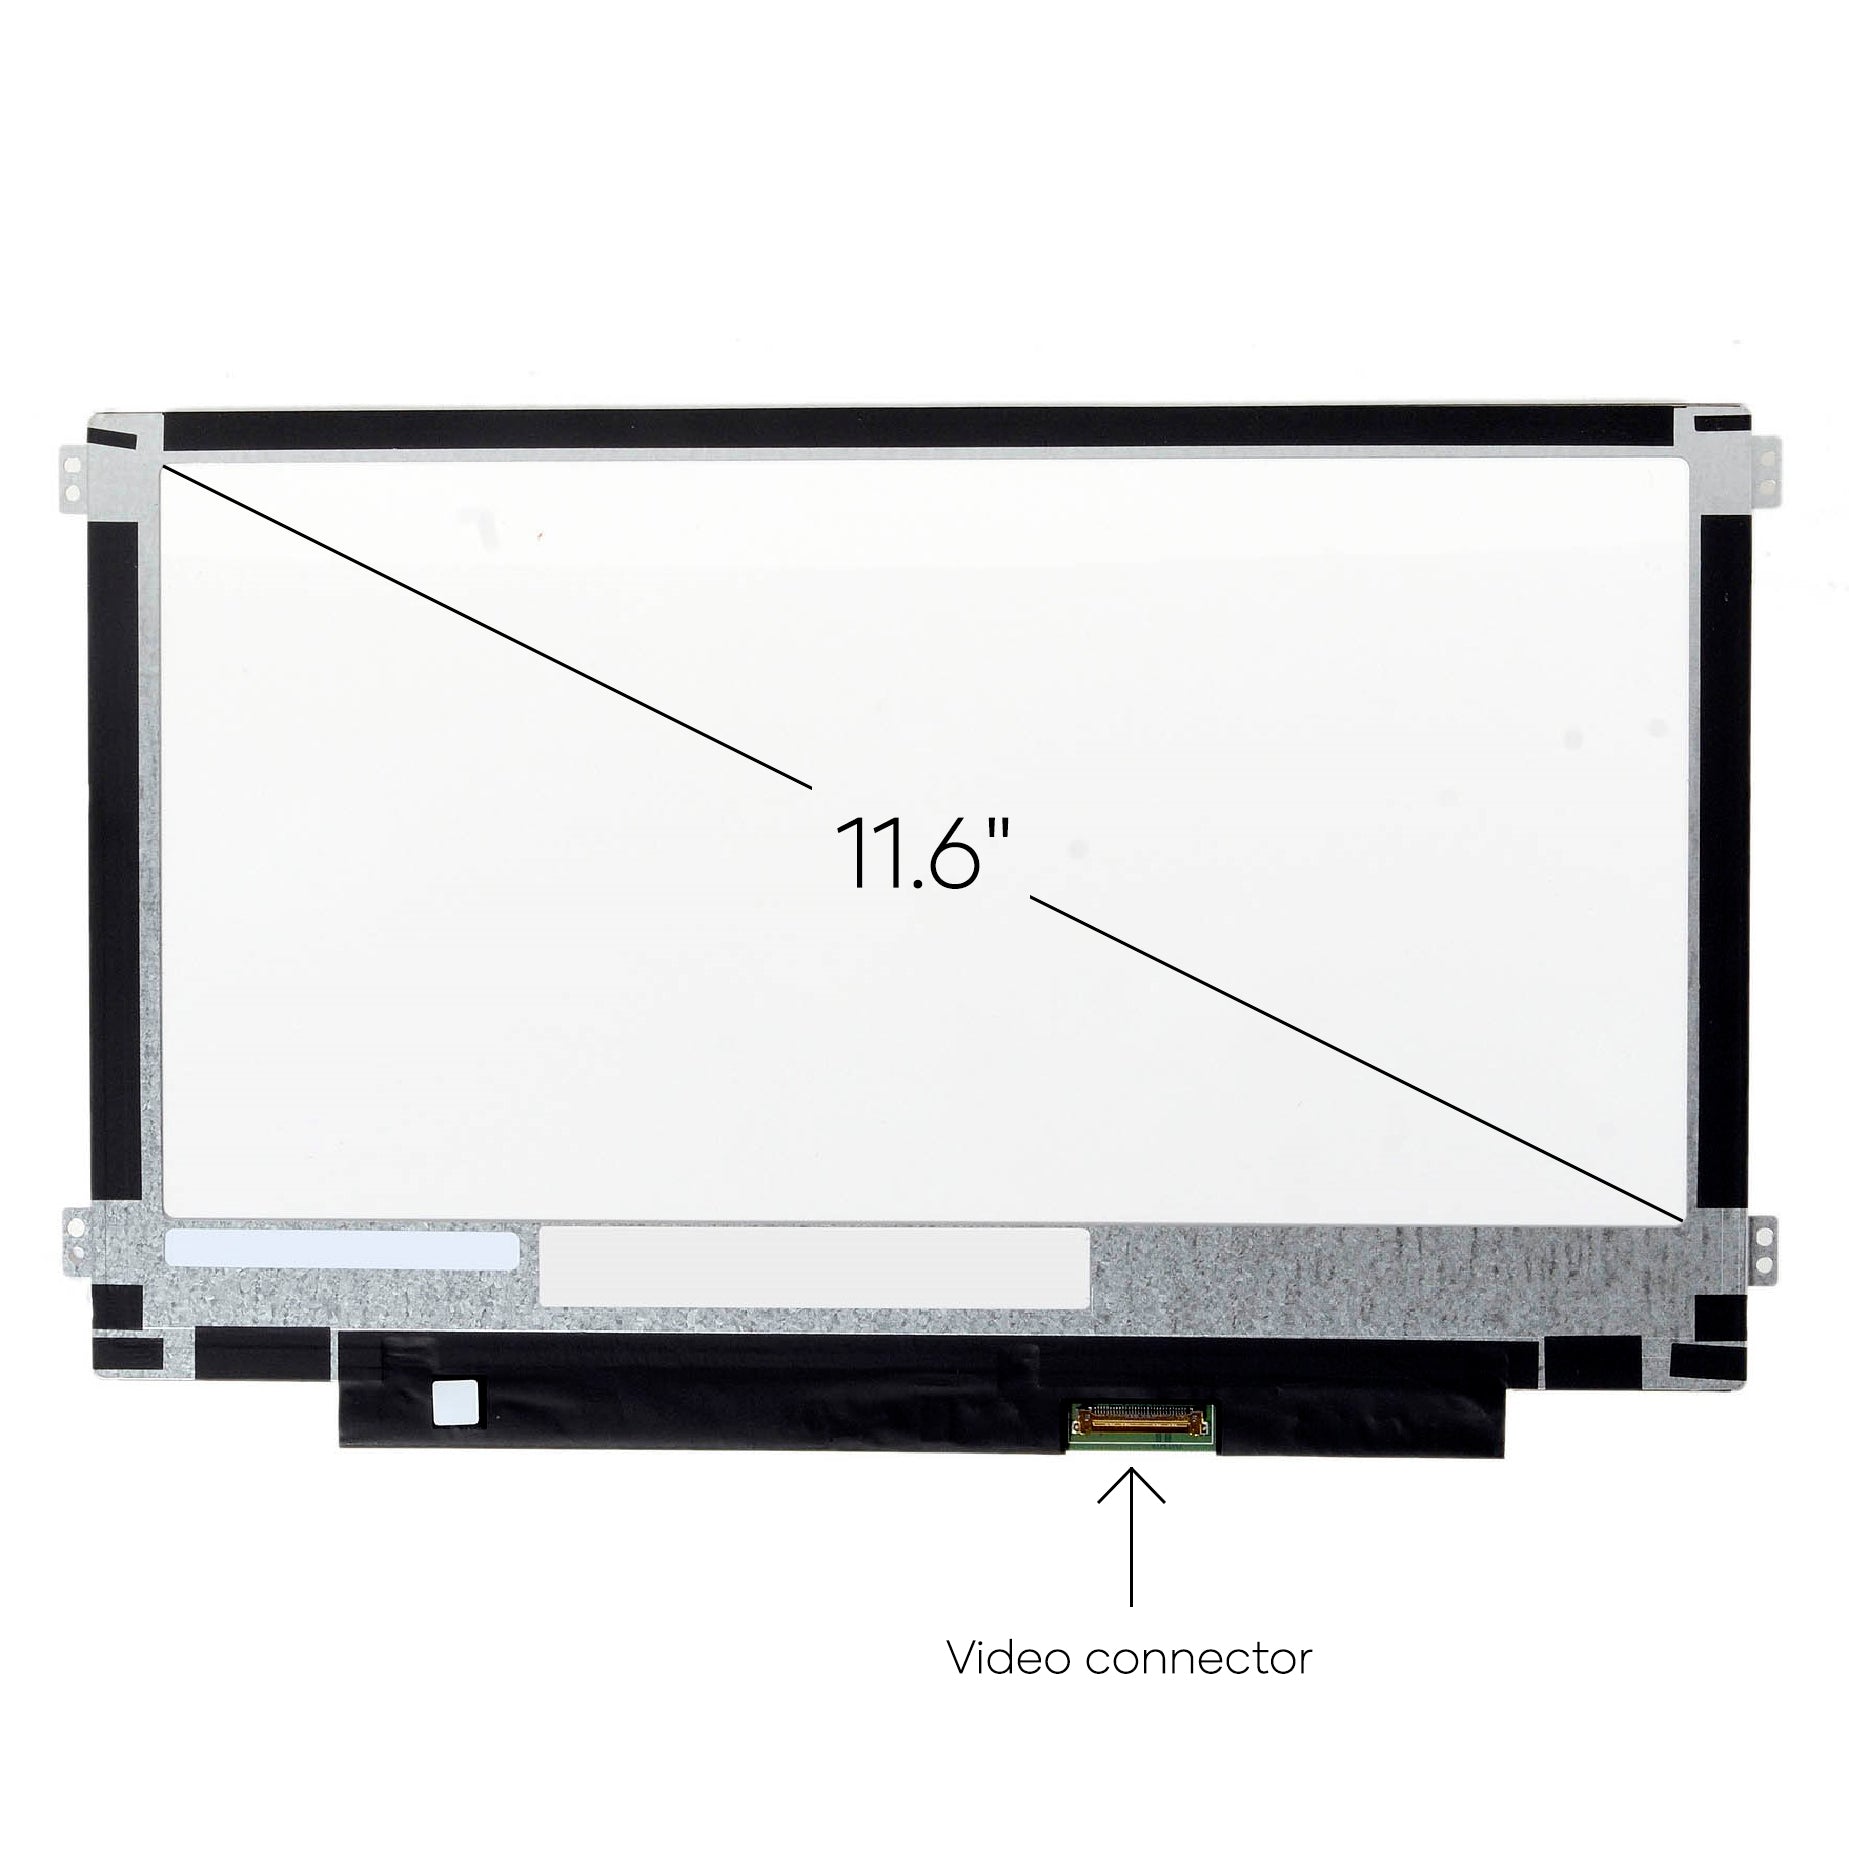 Screen Replacement for Samsung Chromebook XE500C12 HD 1366x768 Matte LCD LED Display